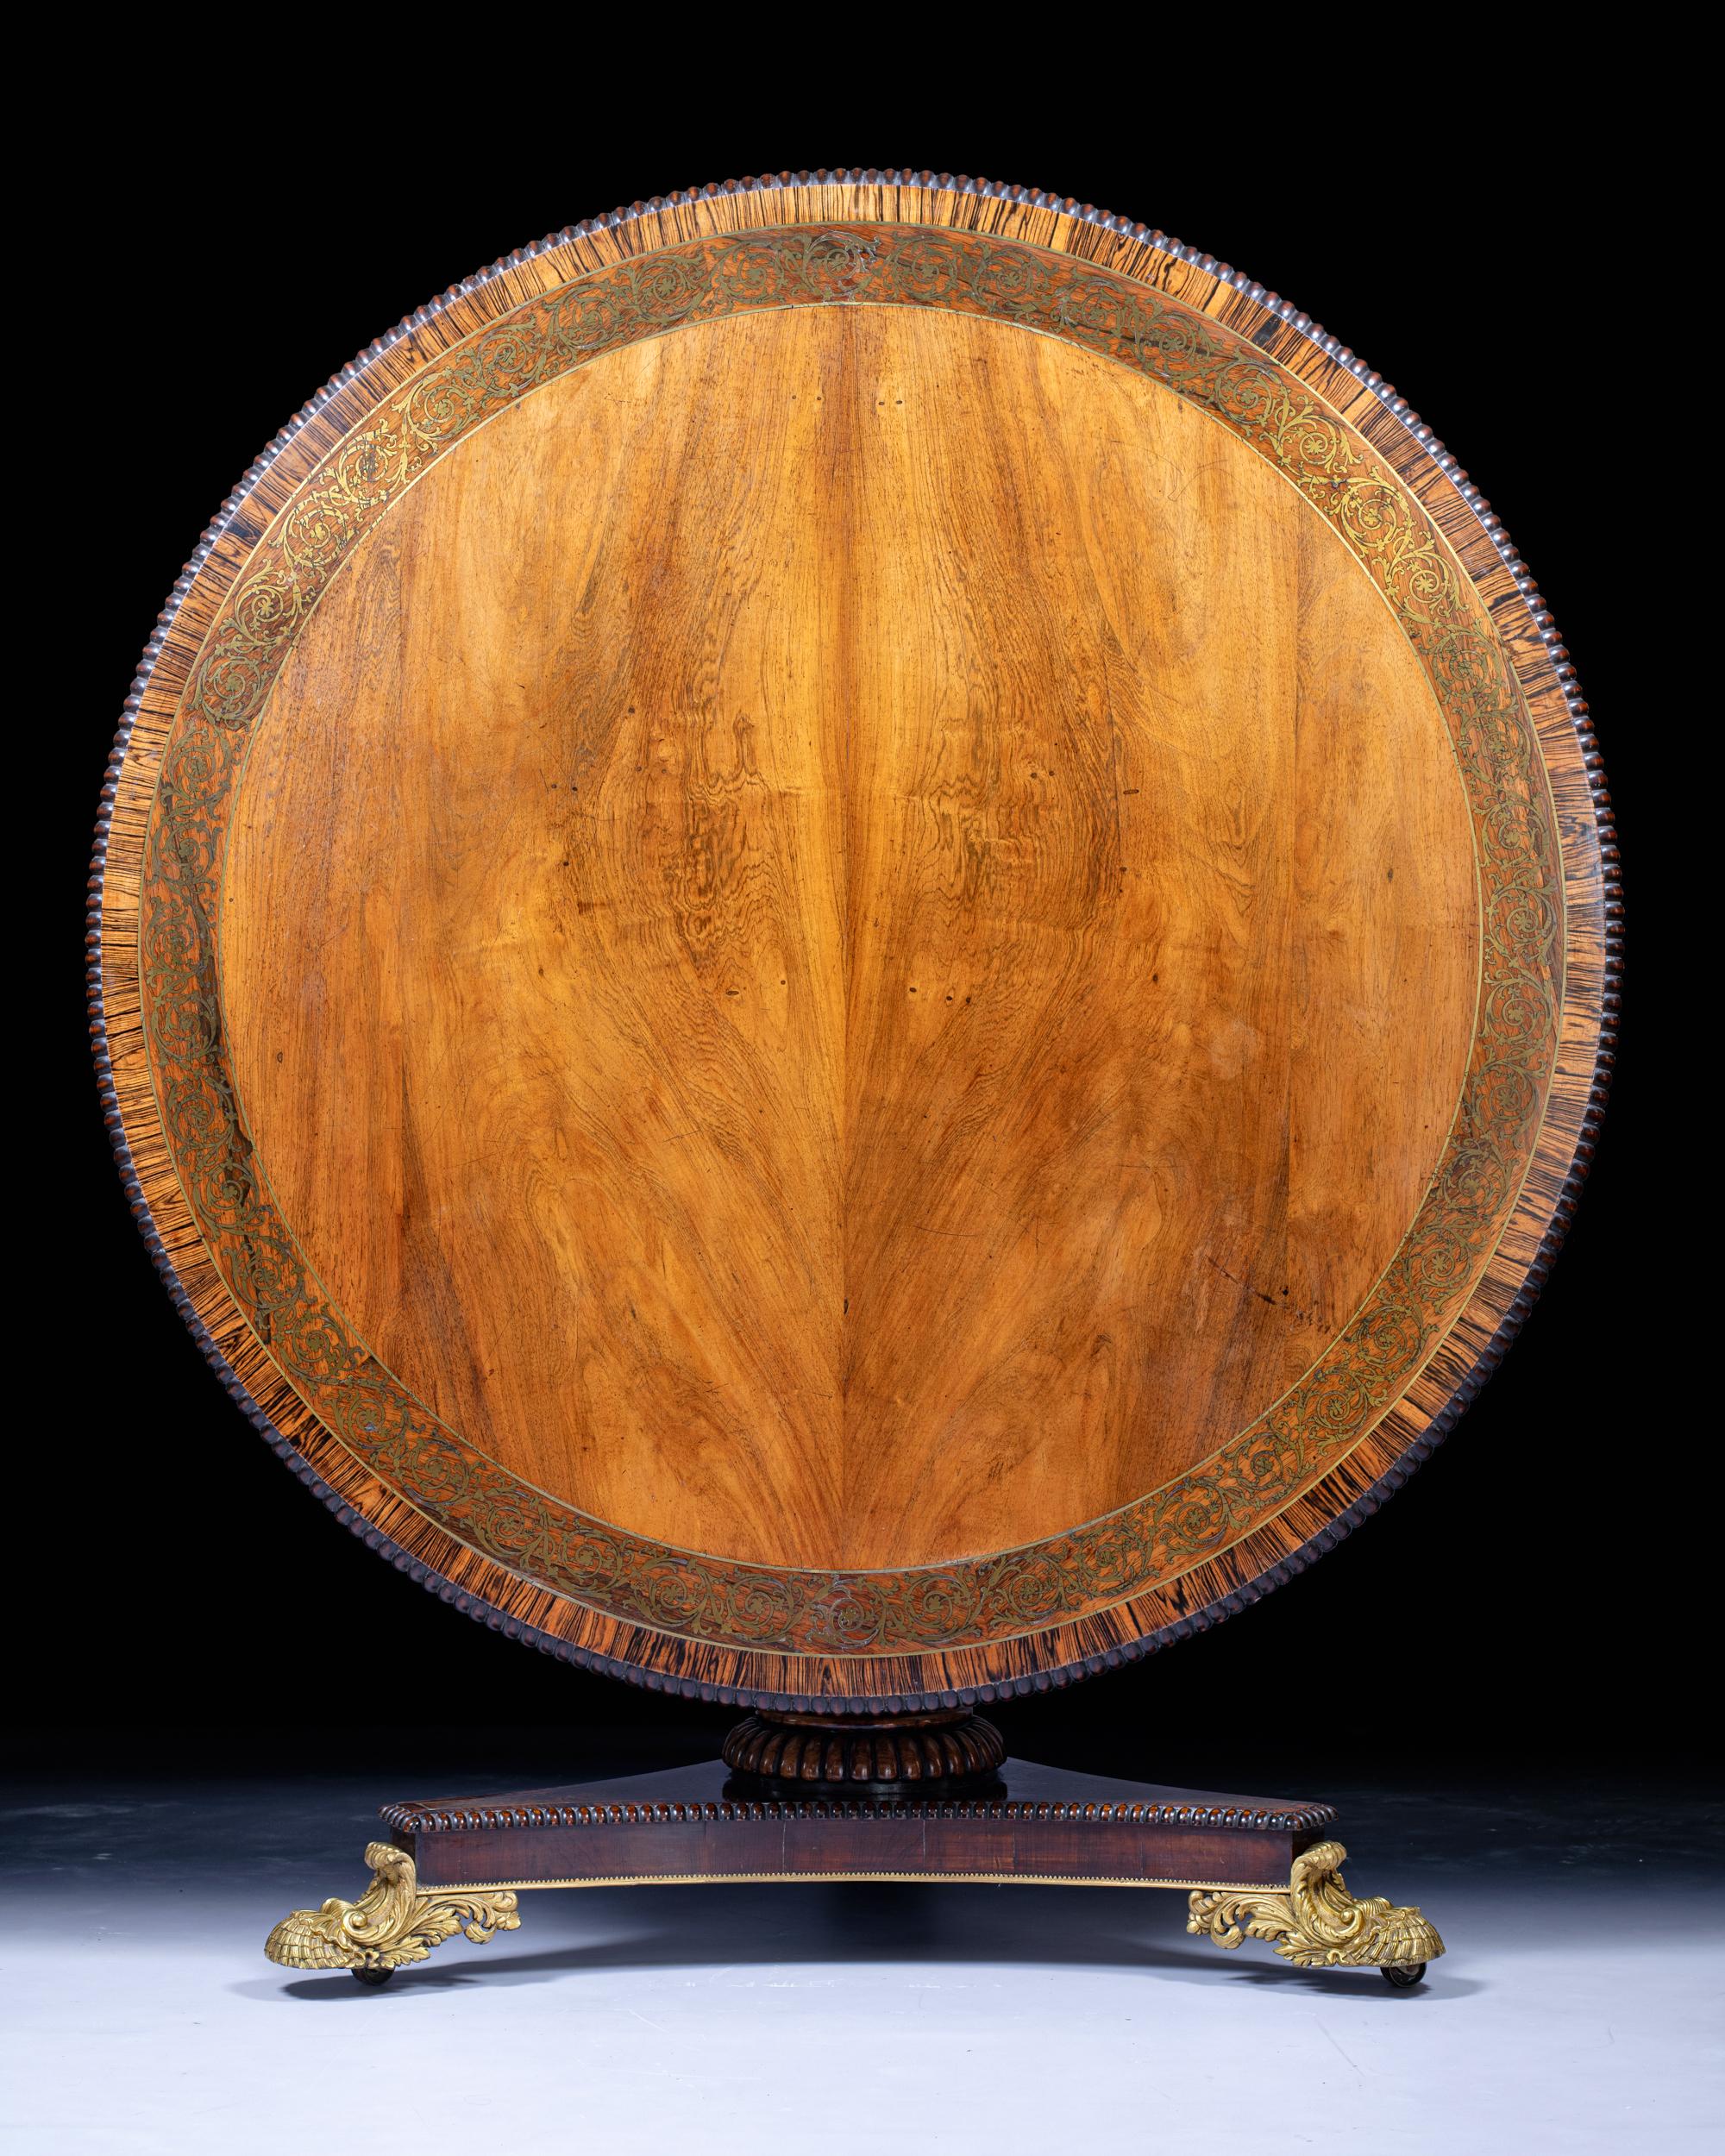 An exceptional early 19th century English Regency centre table, the circular tilt top having radially magnificent figuring and colour,  bordered by intricate brass inlaid, with Zebra wood banding and gadroon edge, supported by a turned, ringed,